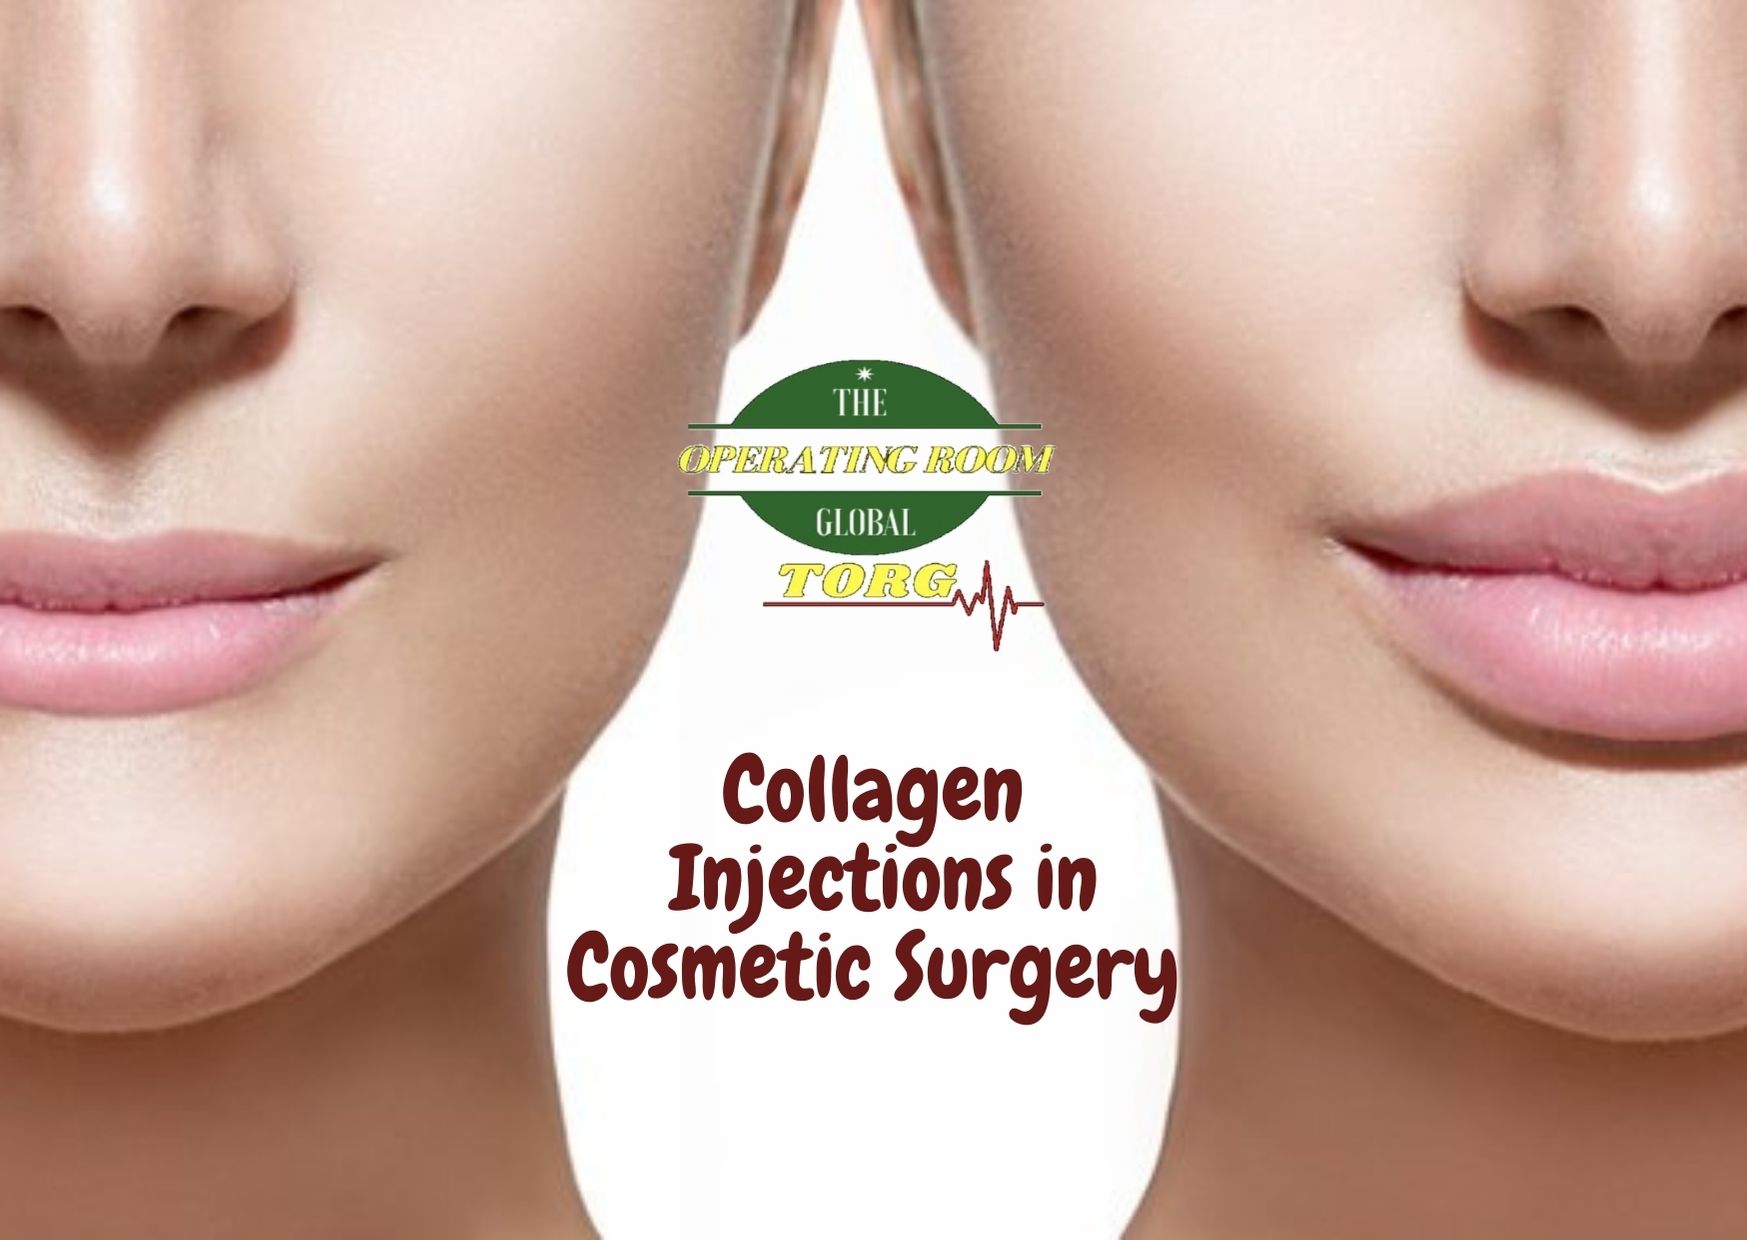 Collagen injections on the forefront of cosmetic plastic surgery